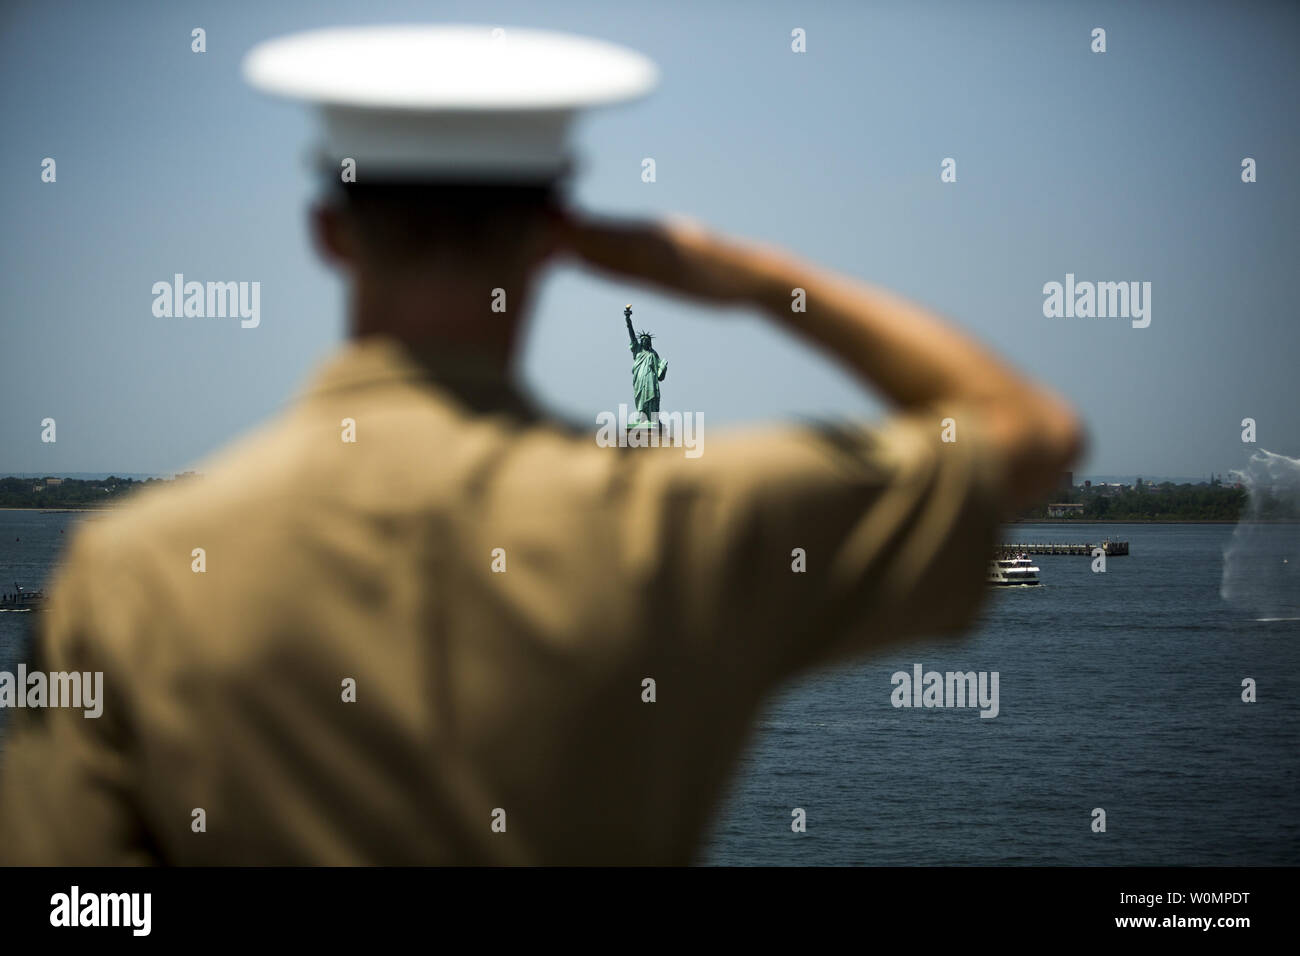 The Statue of Liberty can be seen through the arm of Cpl. Seth Hall, anti-tank missileman, 3rd Battalion, 6th Marine Regiment, as he mans the rails of USS Bataan (LHD-5) in a parade of ships as part of Fleet Week in New York, on May 25, 2016. The Bataan transported more than 500 Marines and sailors with the 24th Marine Expeditionary Unit who will participate in this yearÕs Fleet Week. Photo by Sgt. Rebecca L. Floto/U.S. Marine Corps/UPI Stock Photo